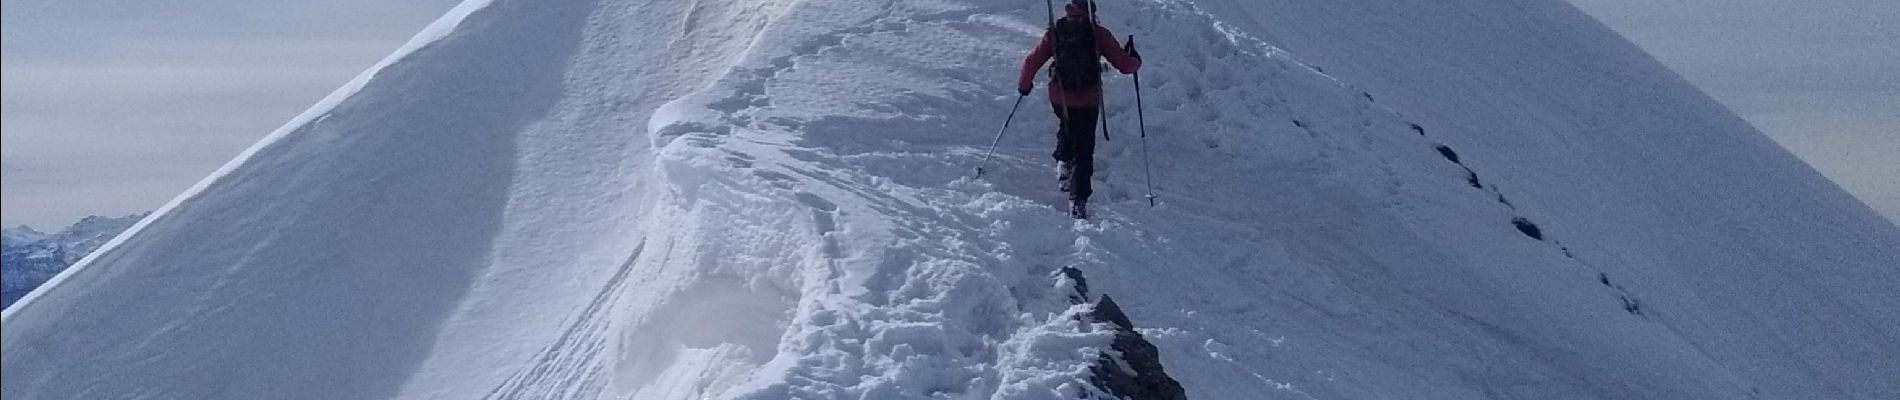 Trail Touring skiing Faverges-Seythenex - Petite et Grande Chaurionde - Photo